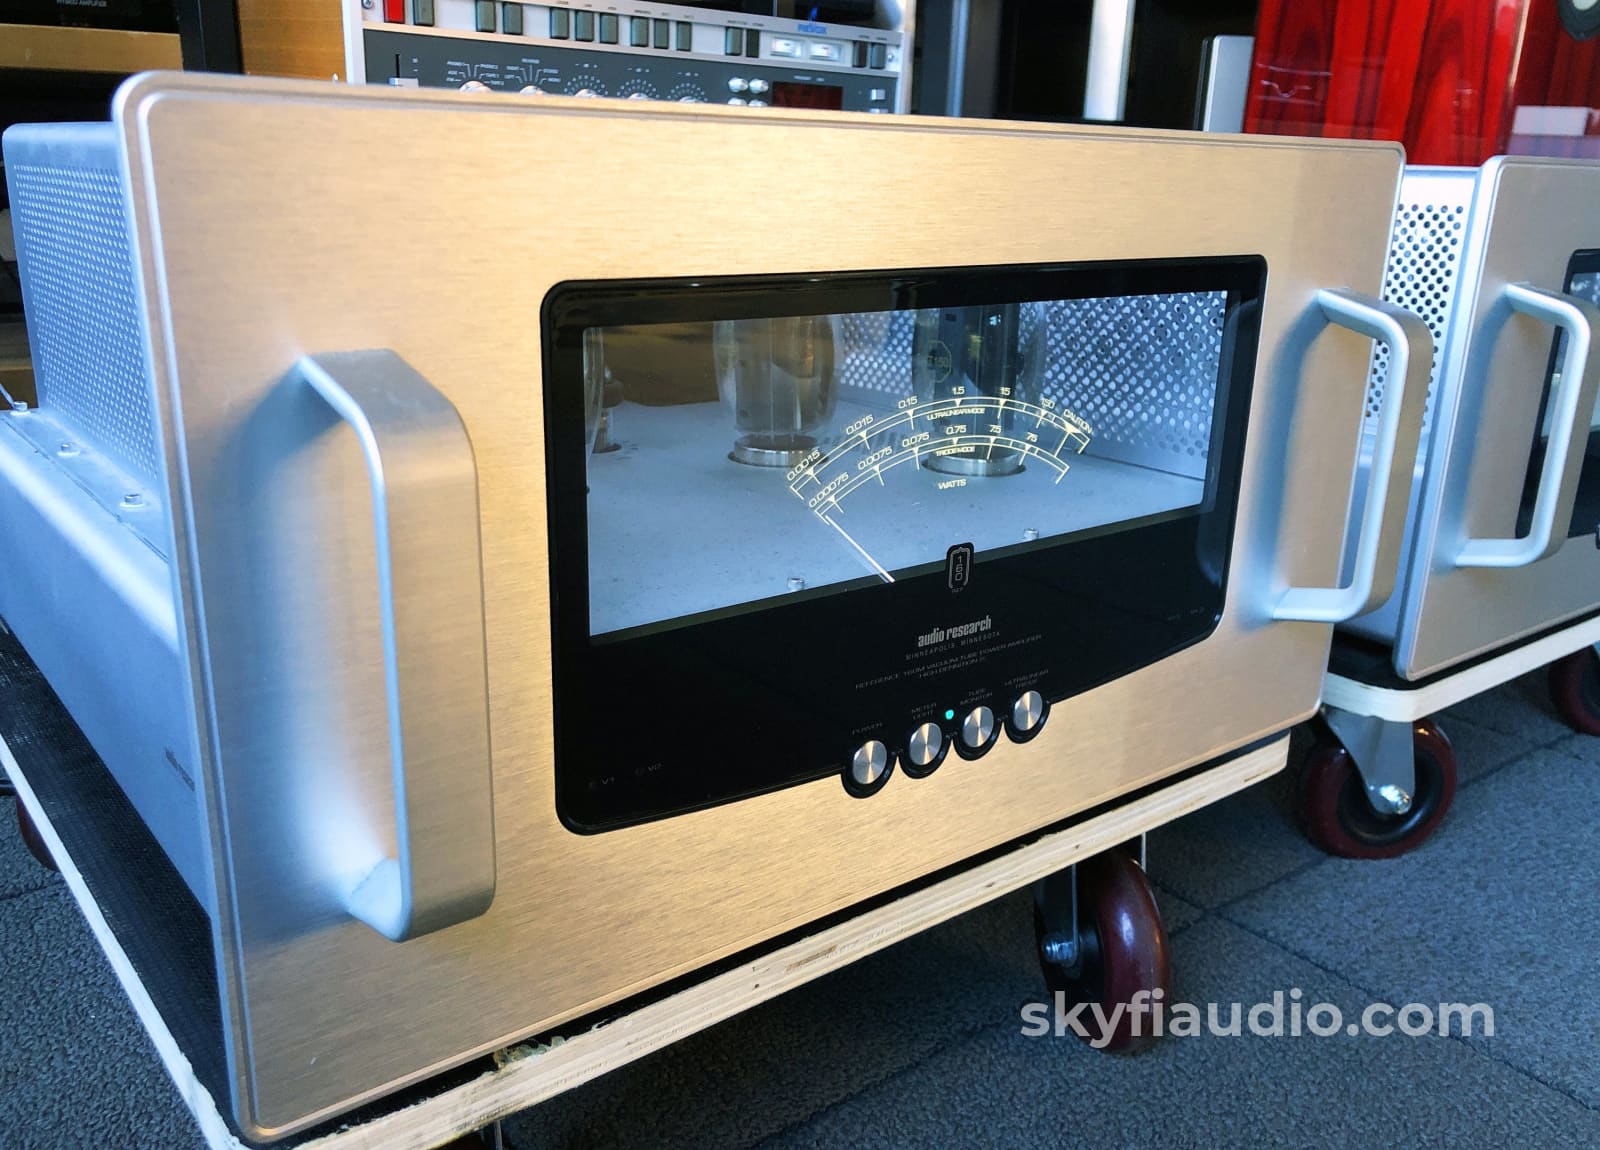 Audio Research Reference 160 M - Most Beautiful Amplifier Ever Made